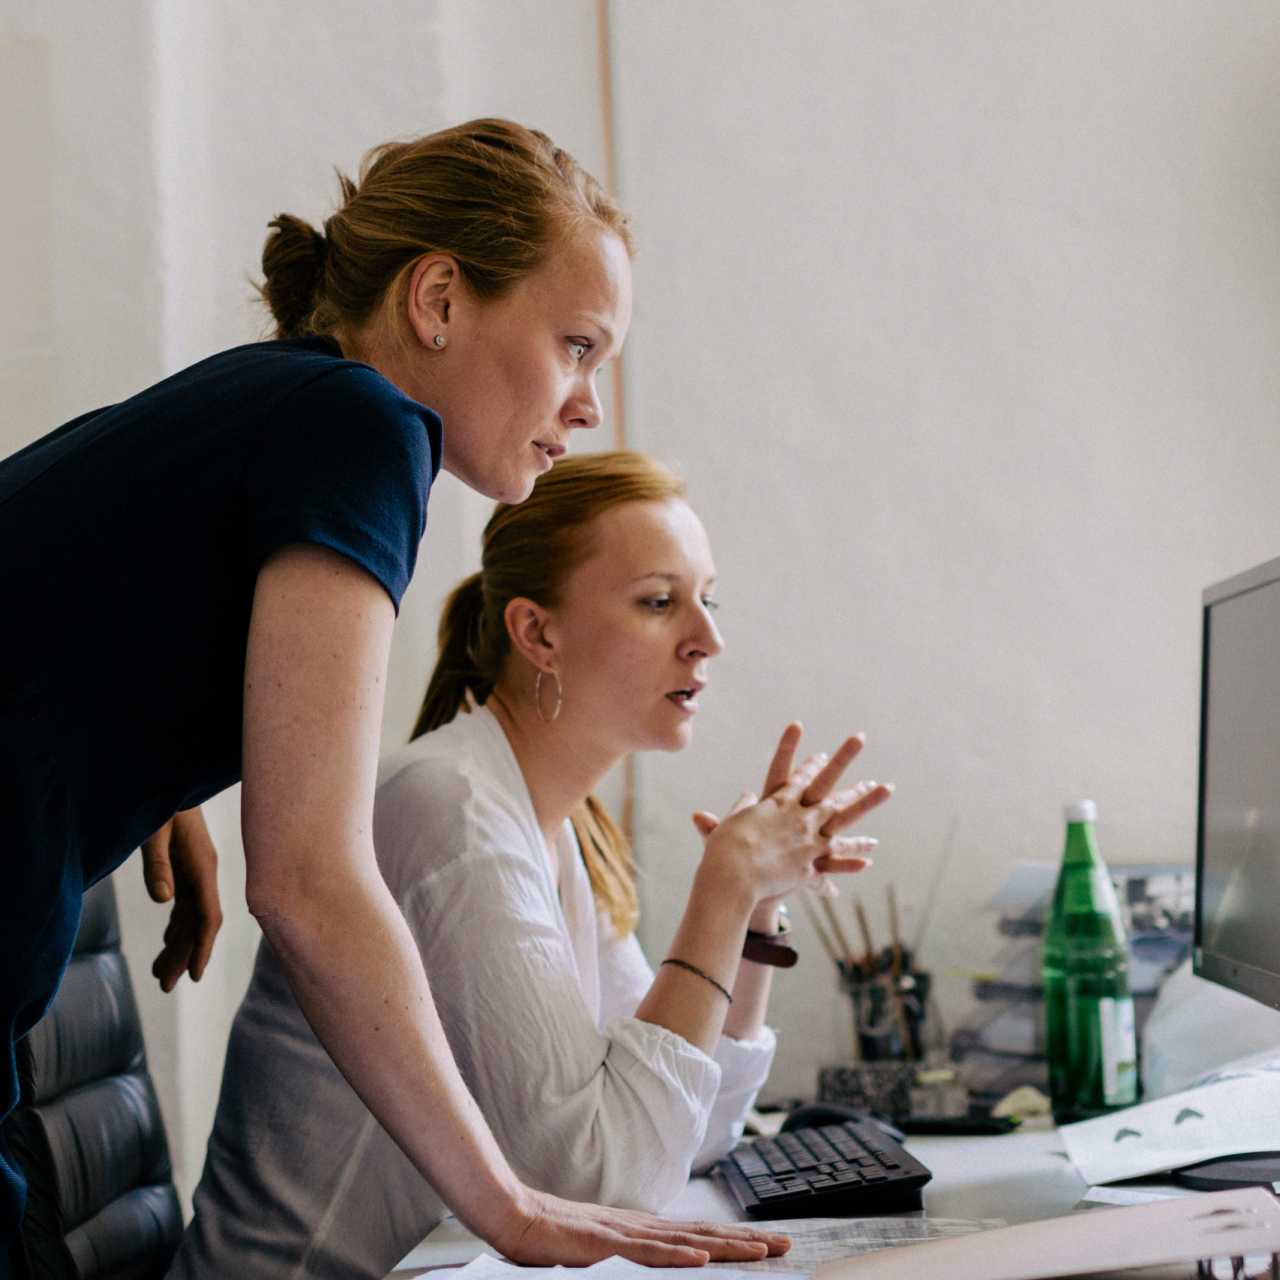 Two women at desk talking and looking at desktop computer